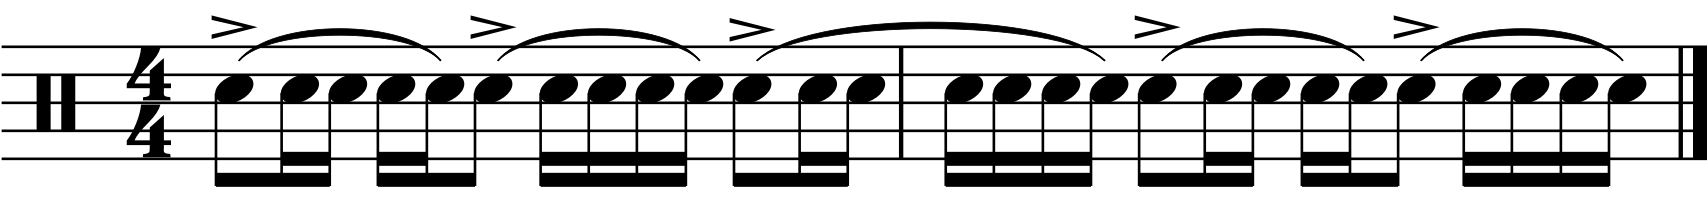 The basic rhythm for these fills